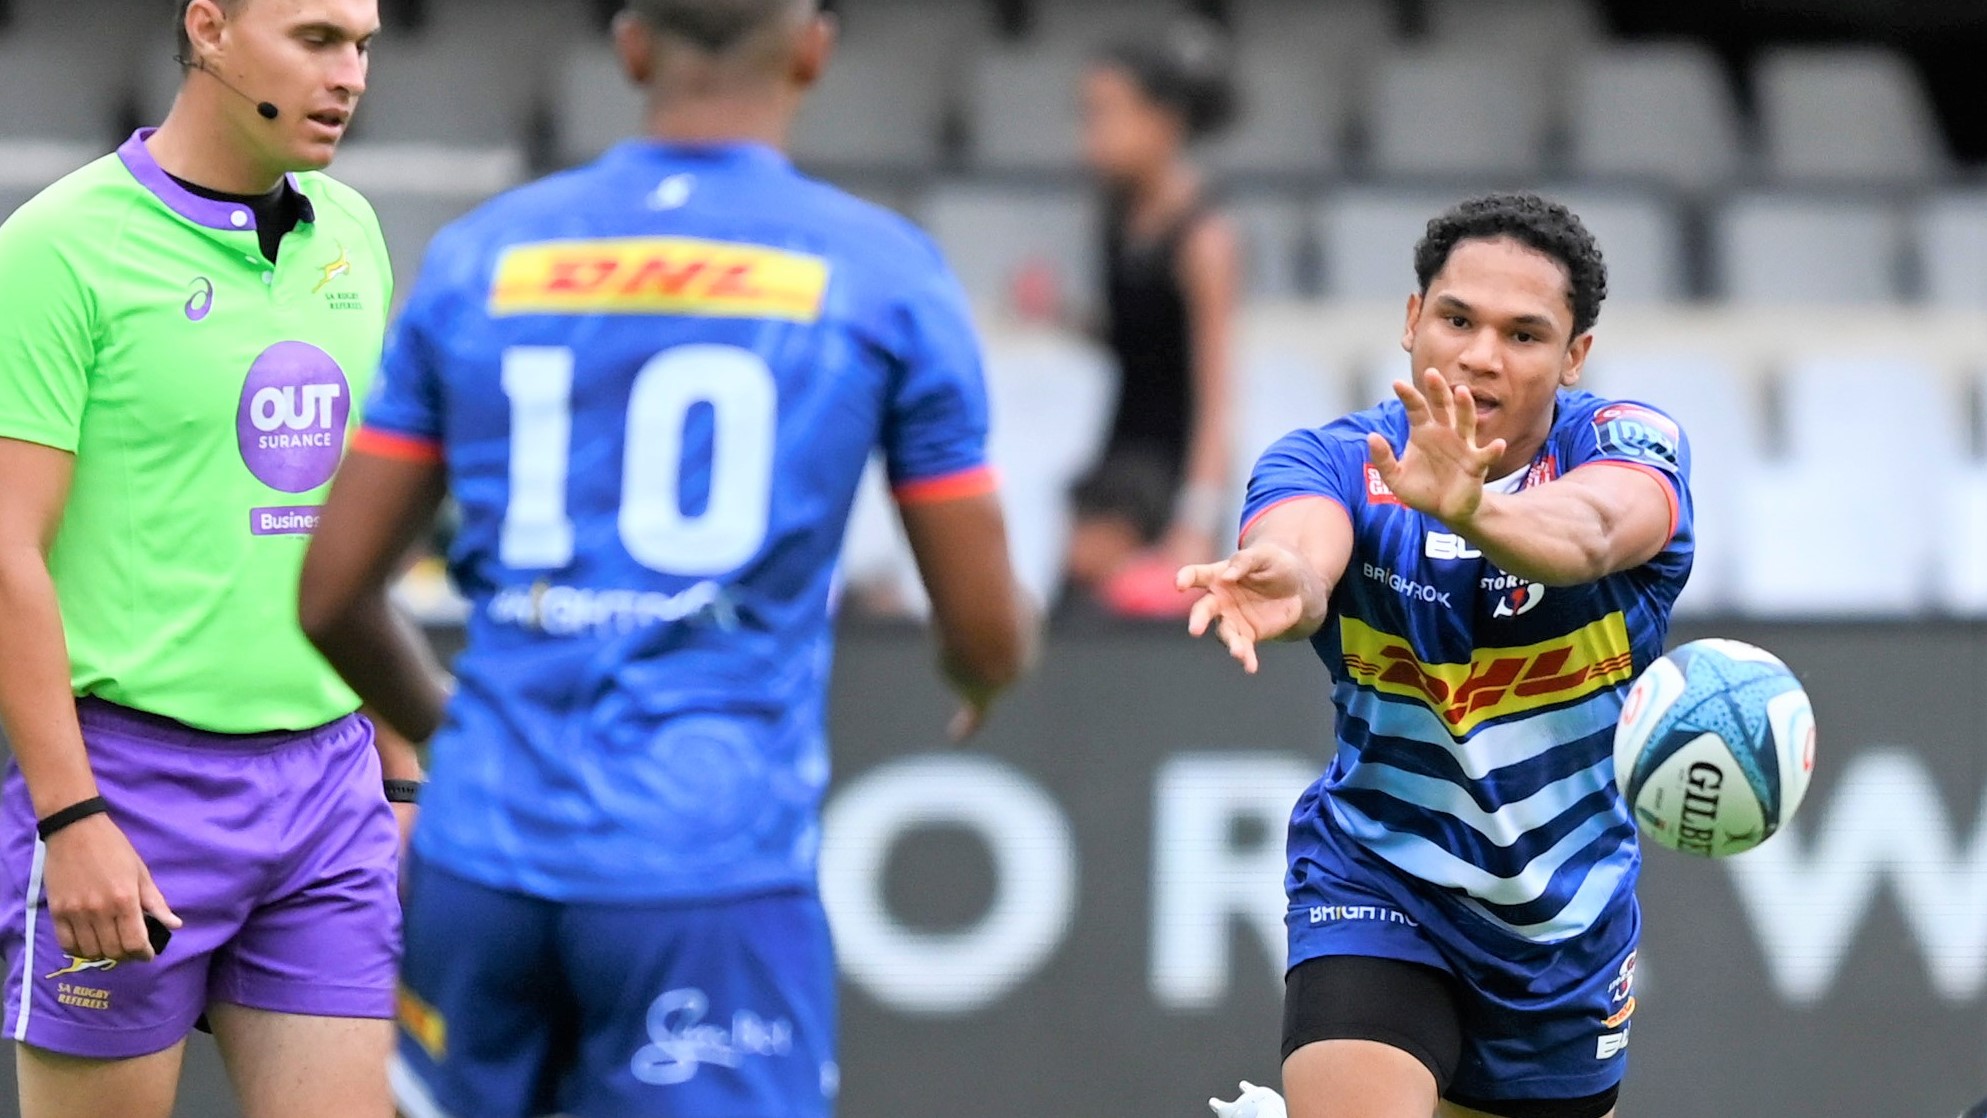 Herschel Jantjies of the Stormers spins the ball out to Manie Libbok of the Stormers during the United Rugby Championship 2021/22 match between the Sharks and Stormers held at Kings Park in Durban on 29 January 2021 ©Gerhard Duraan/BackpagePix